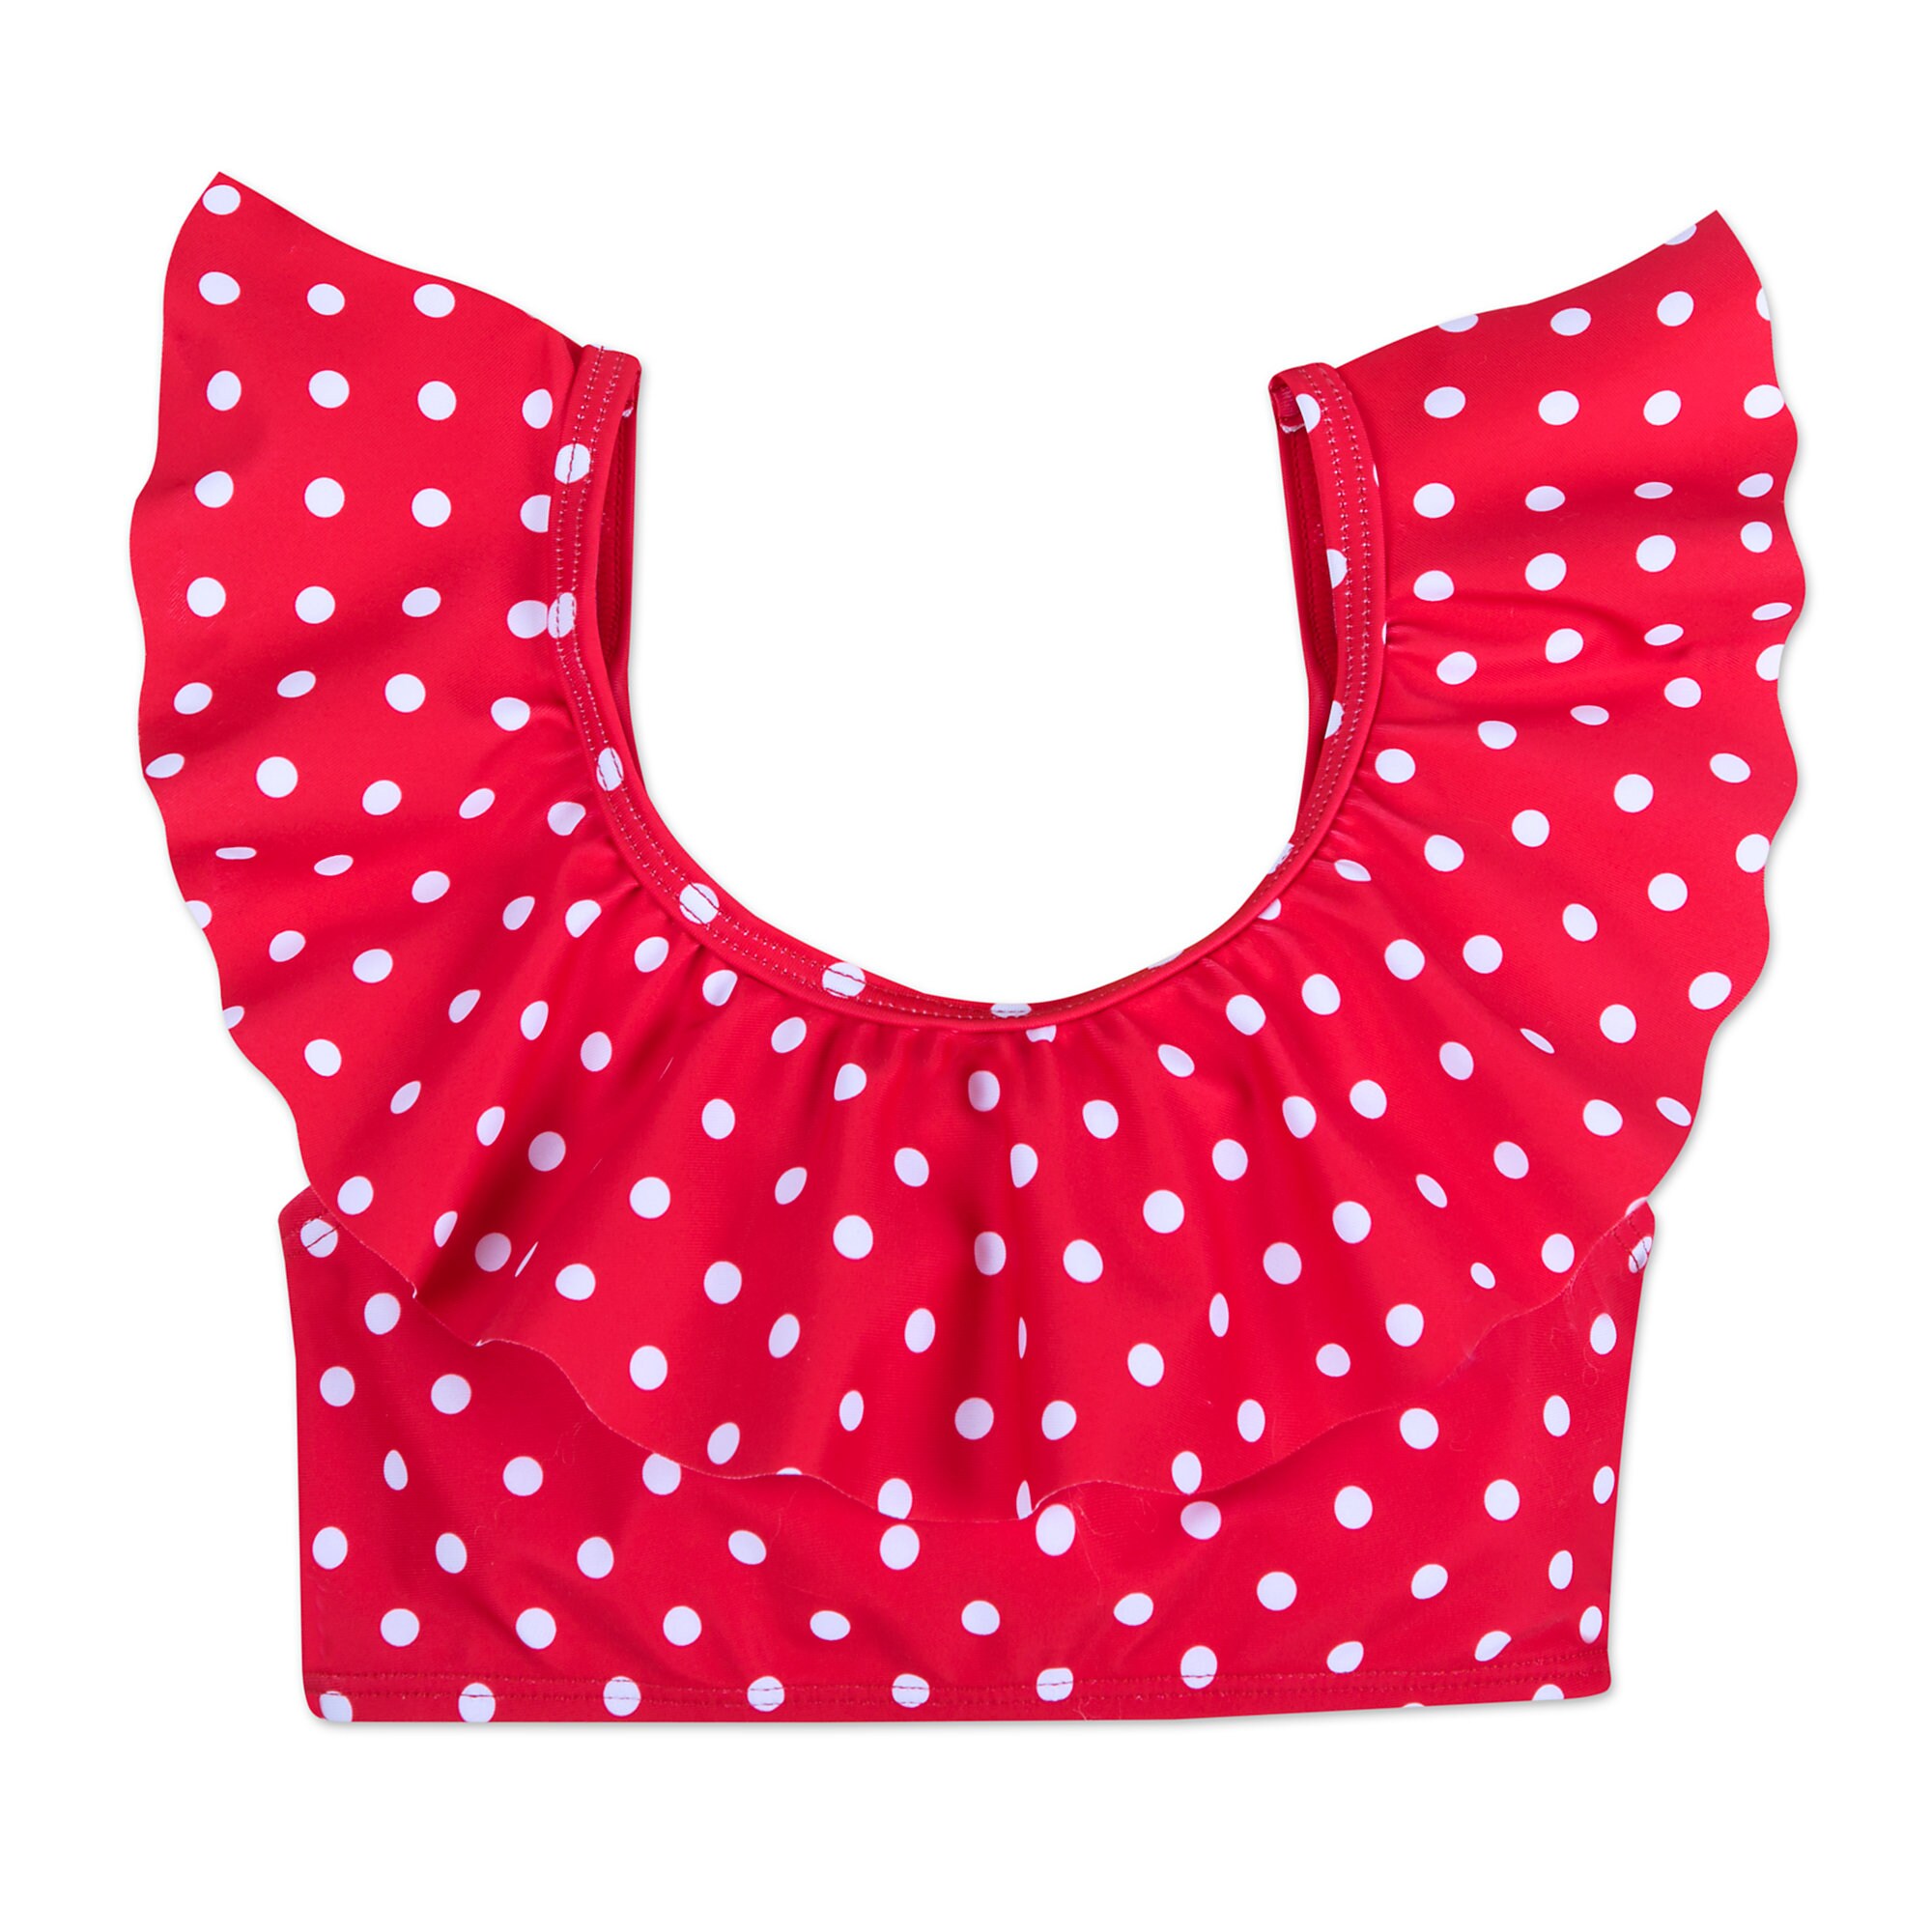 Minnie Mouse Deluxe Swimsuit Set for Girls